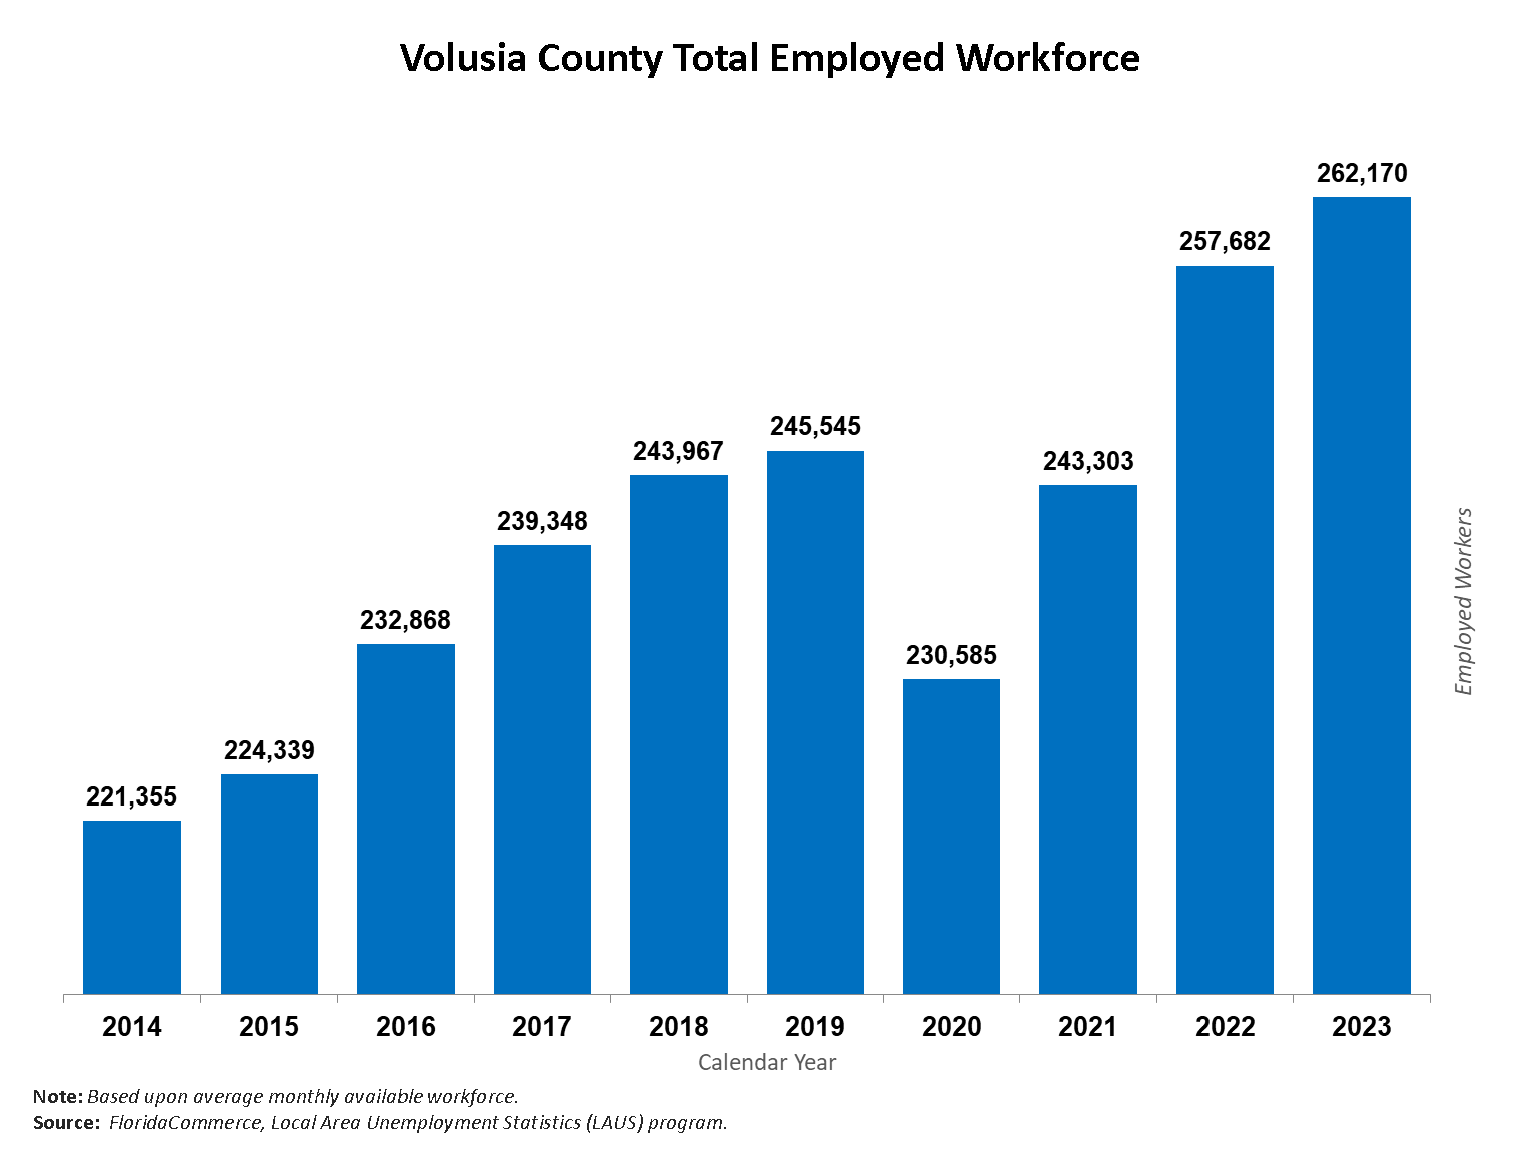 Volusia County Total Employed workforce trend from 2013 to 2022. Click image for pdf with details.